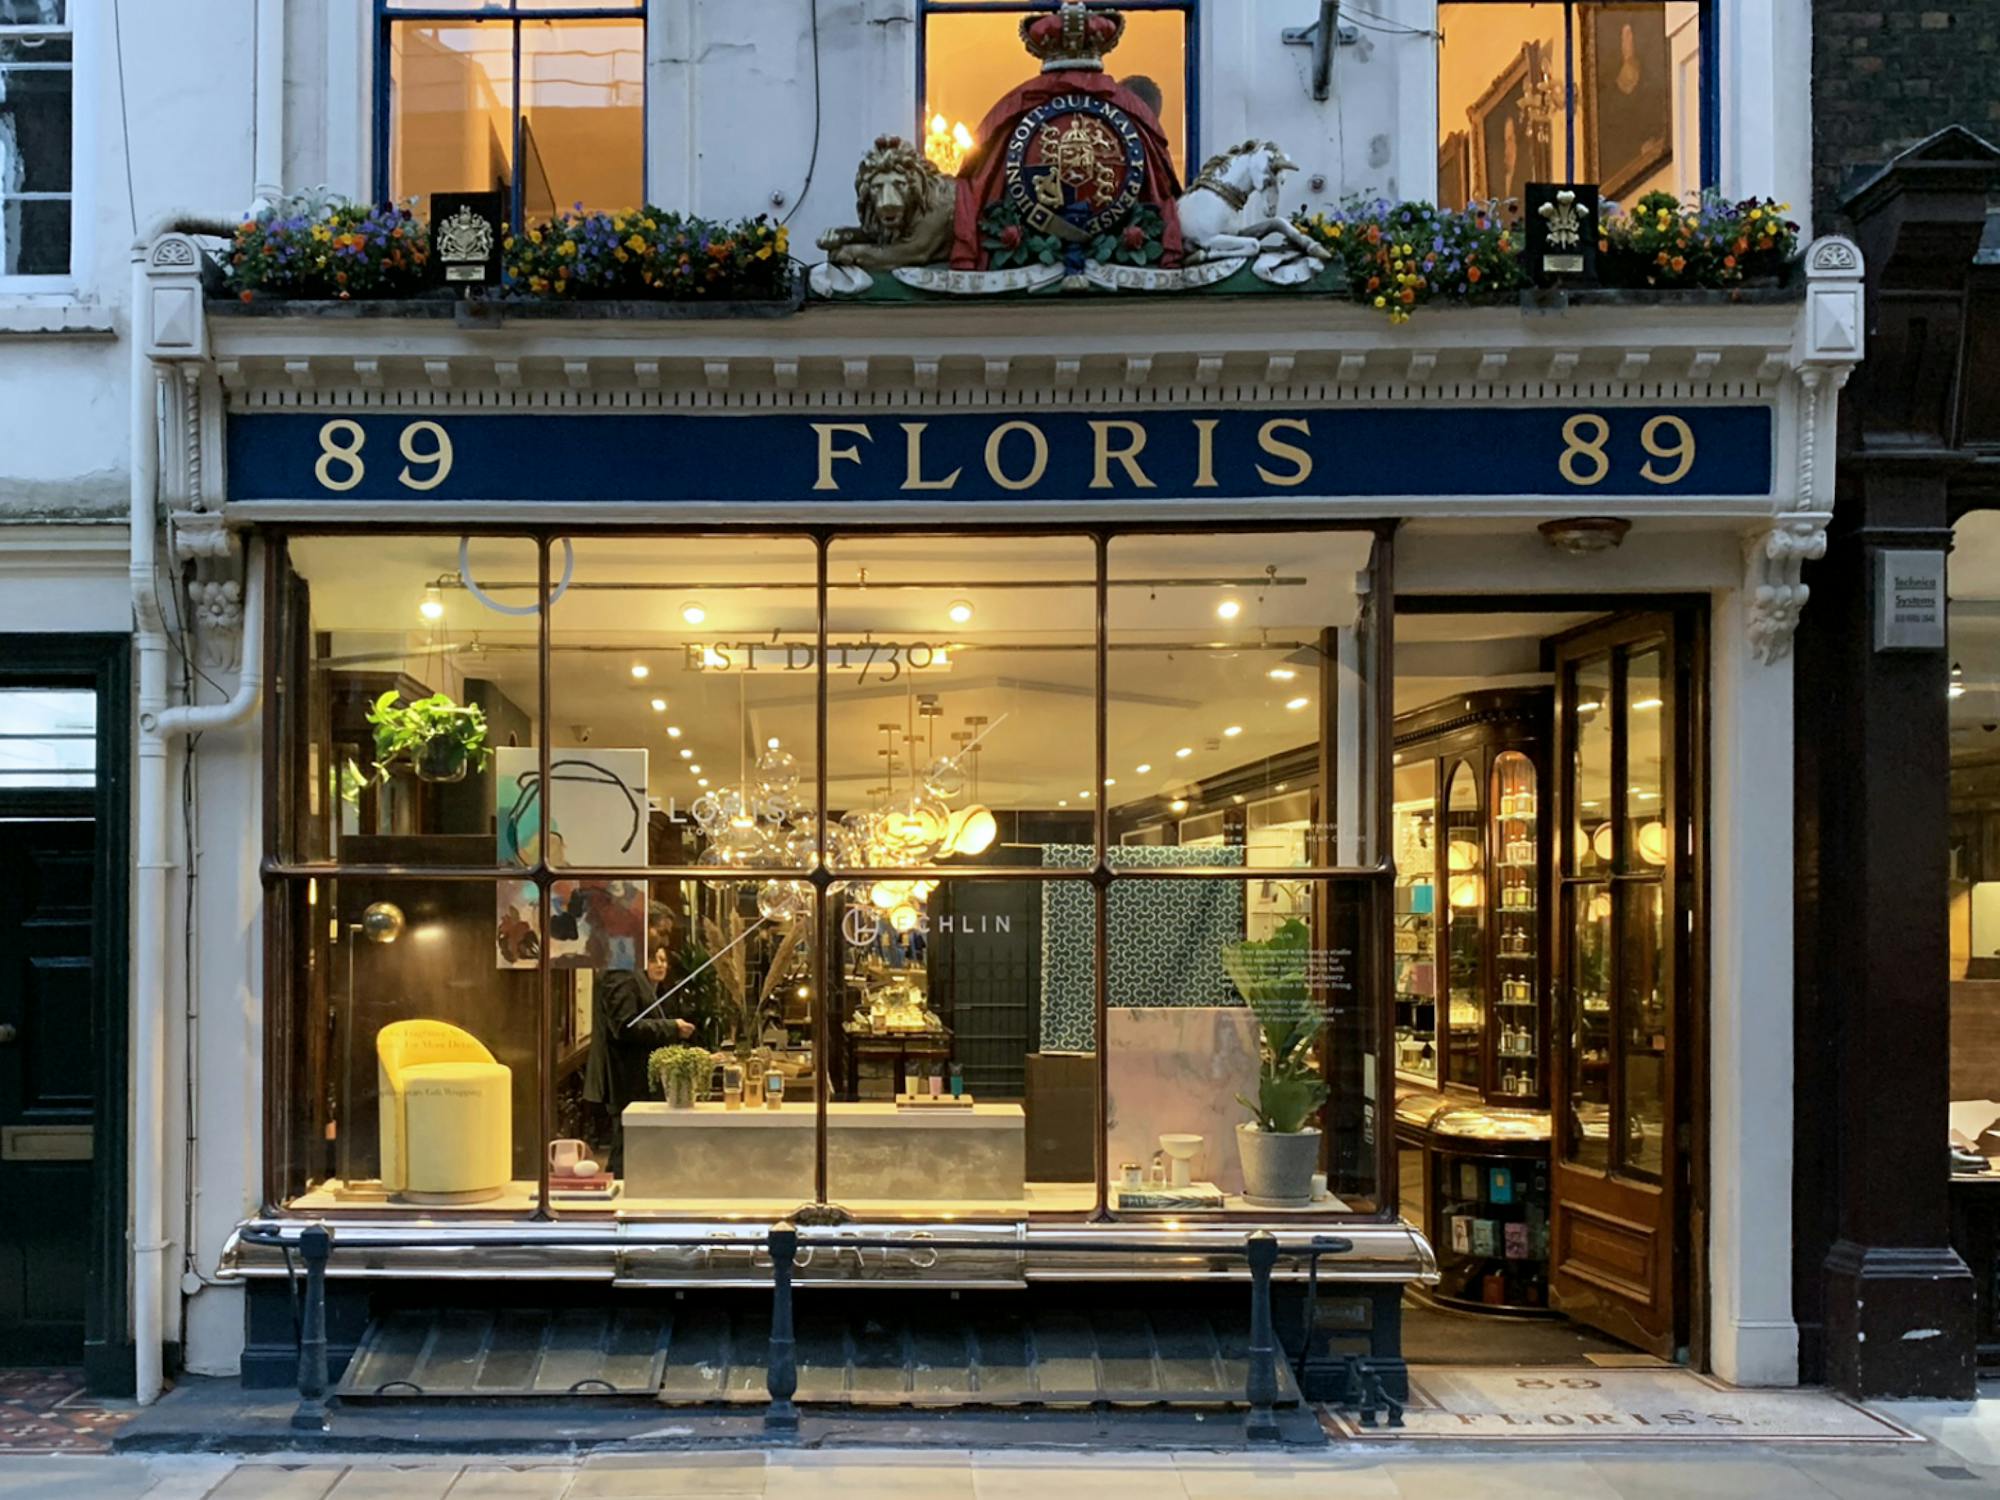 Walpole Weekend William Wolfe’s Guide To Excellent Living In London: Floris 